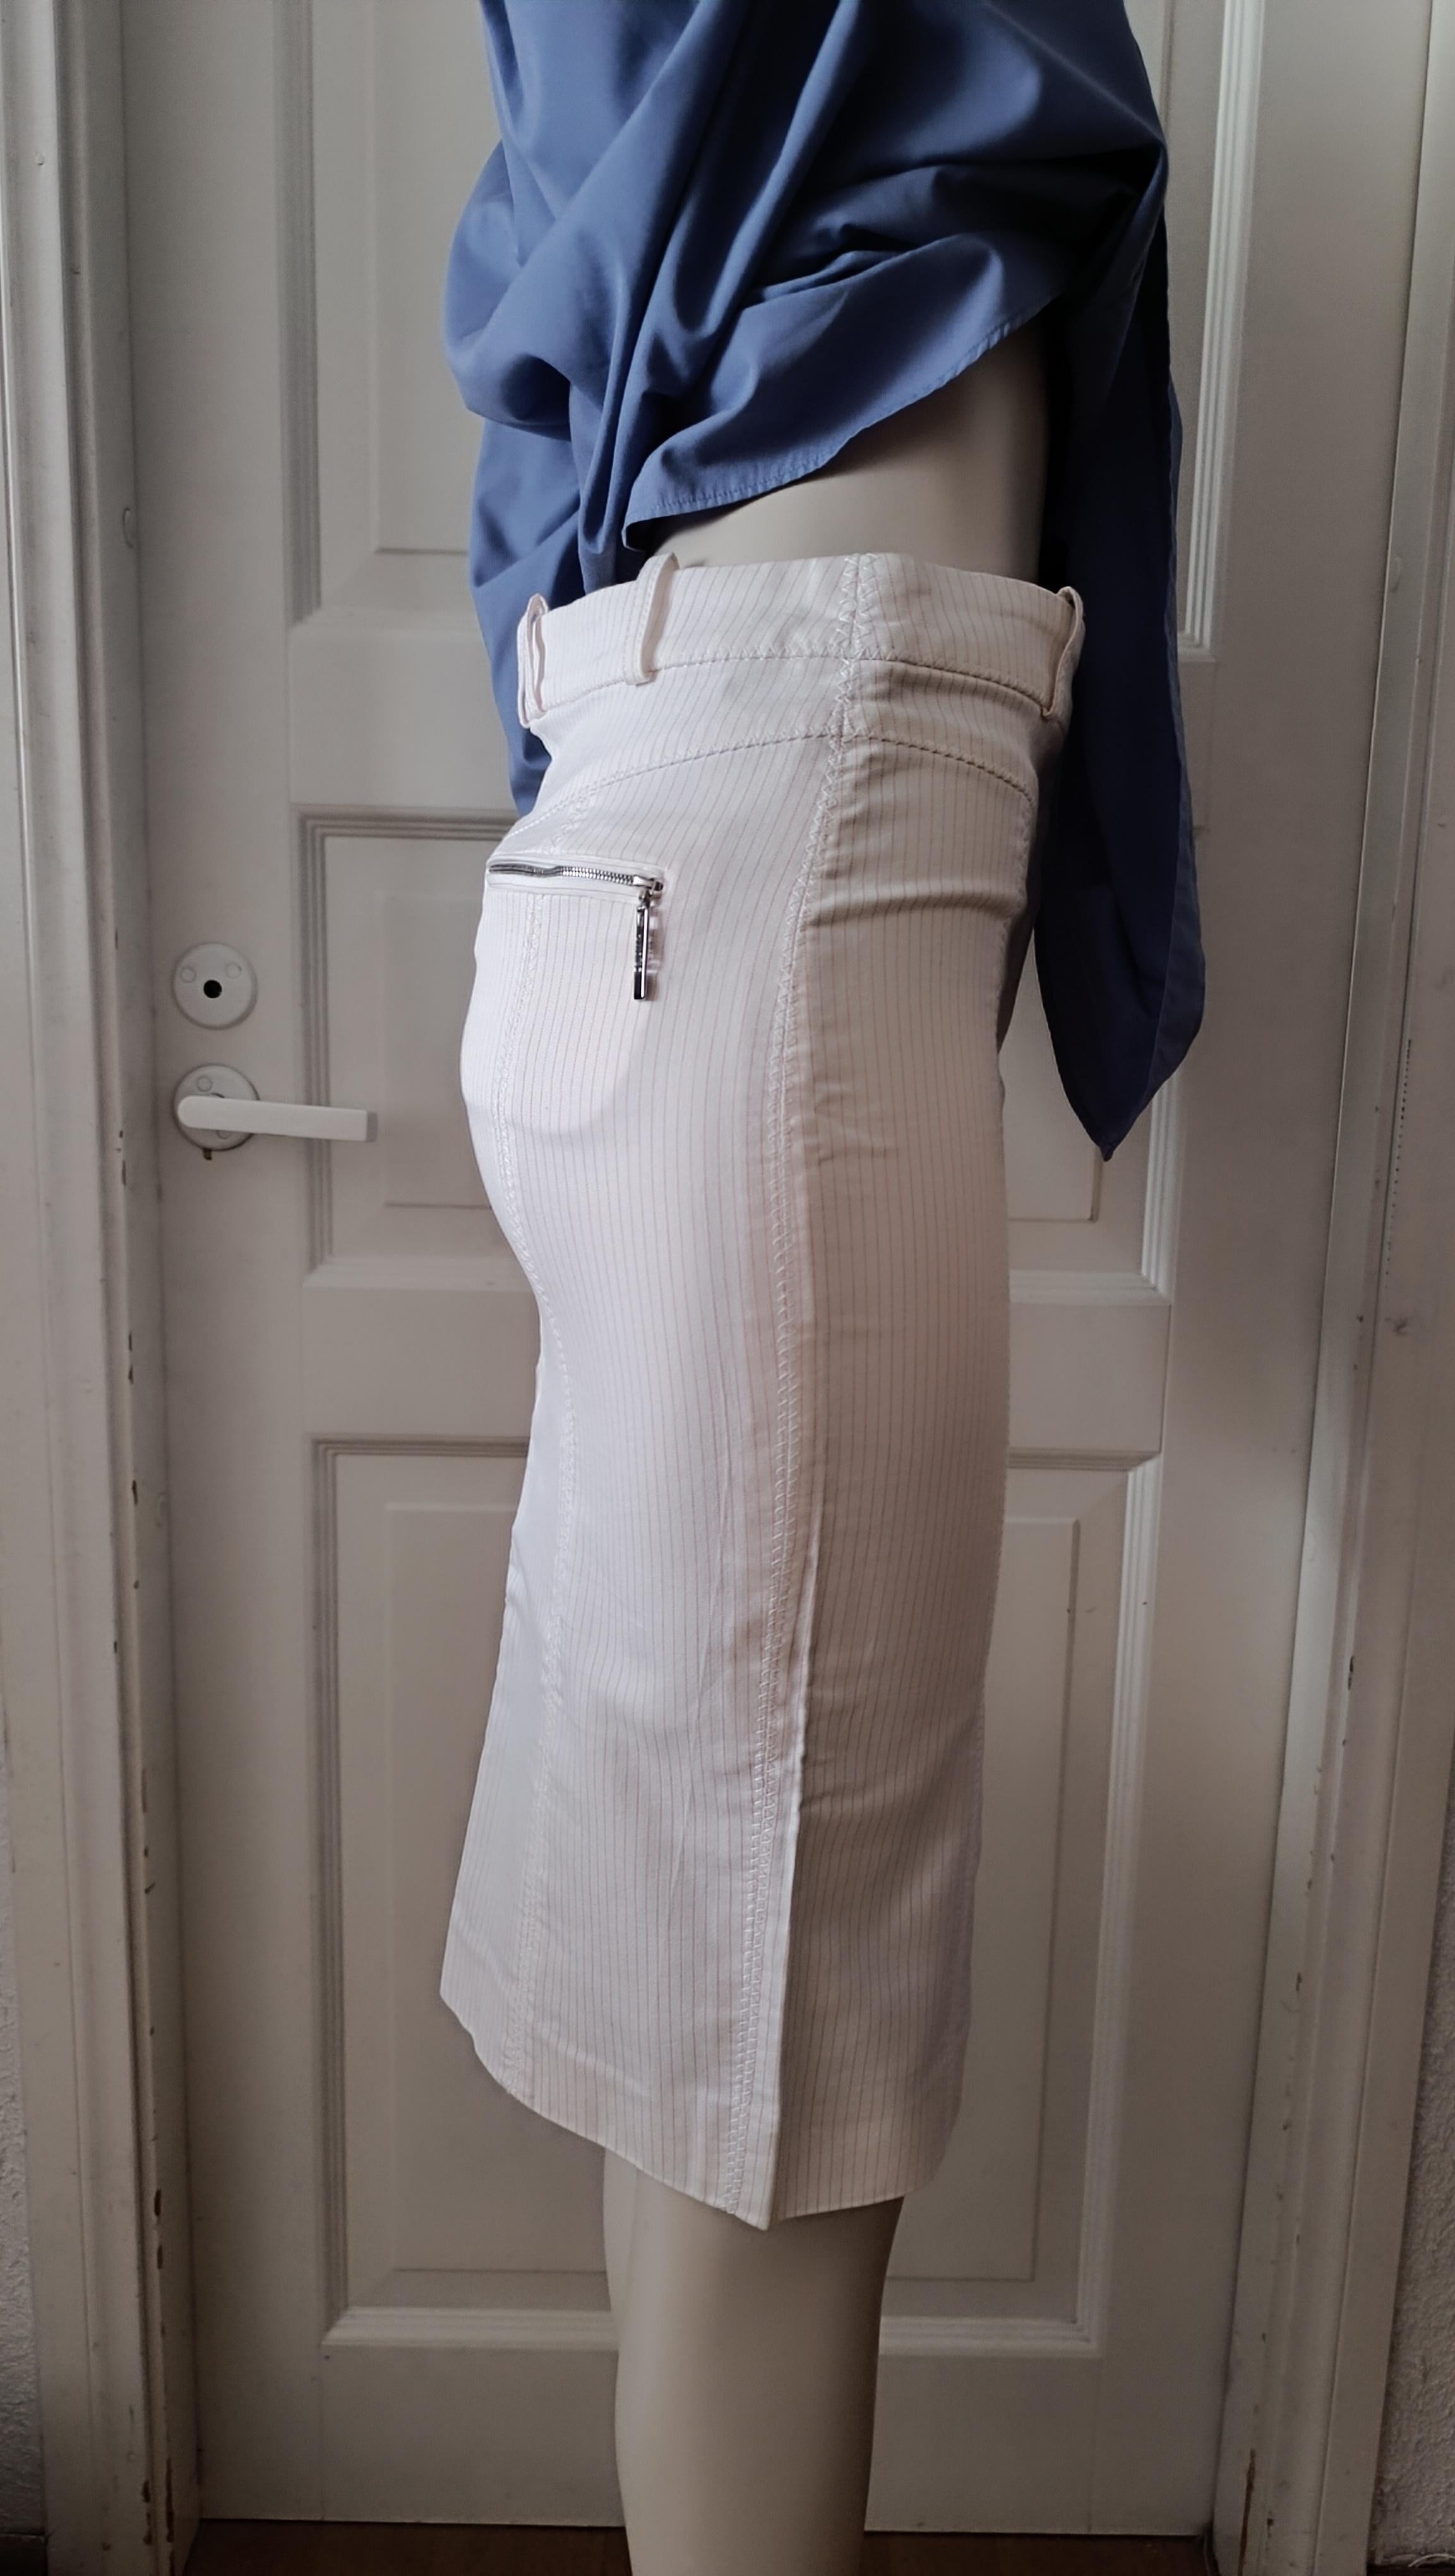 Christian Dior & John Galliano 2005 pensil cotton Skirt logo buttonY2K In Excellent Condition For Sale In Алматинский Почтамт, KZ